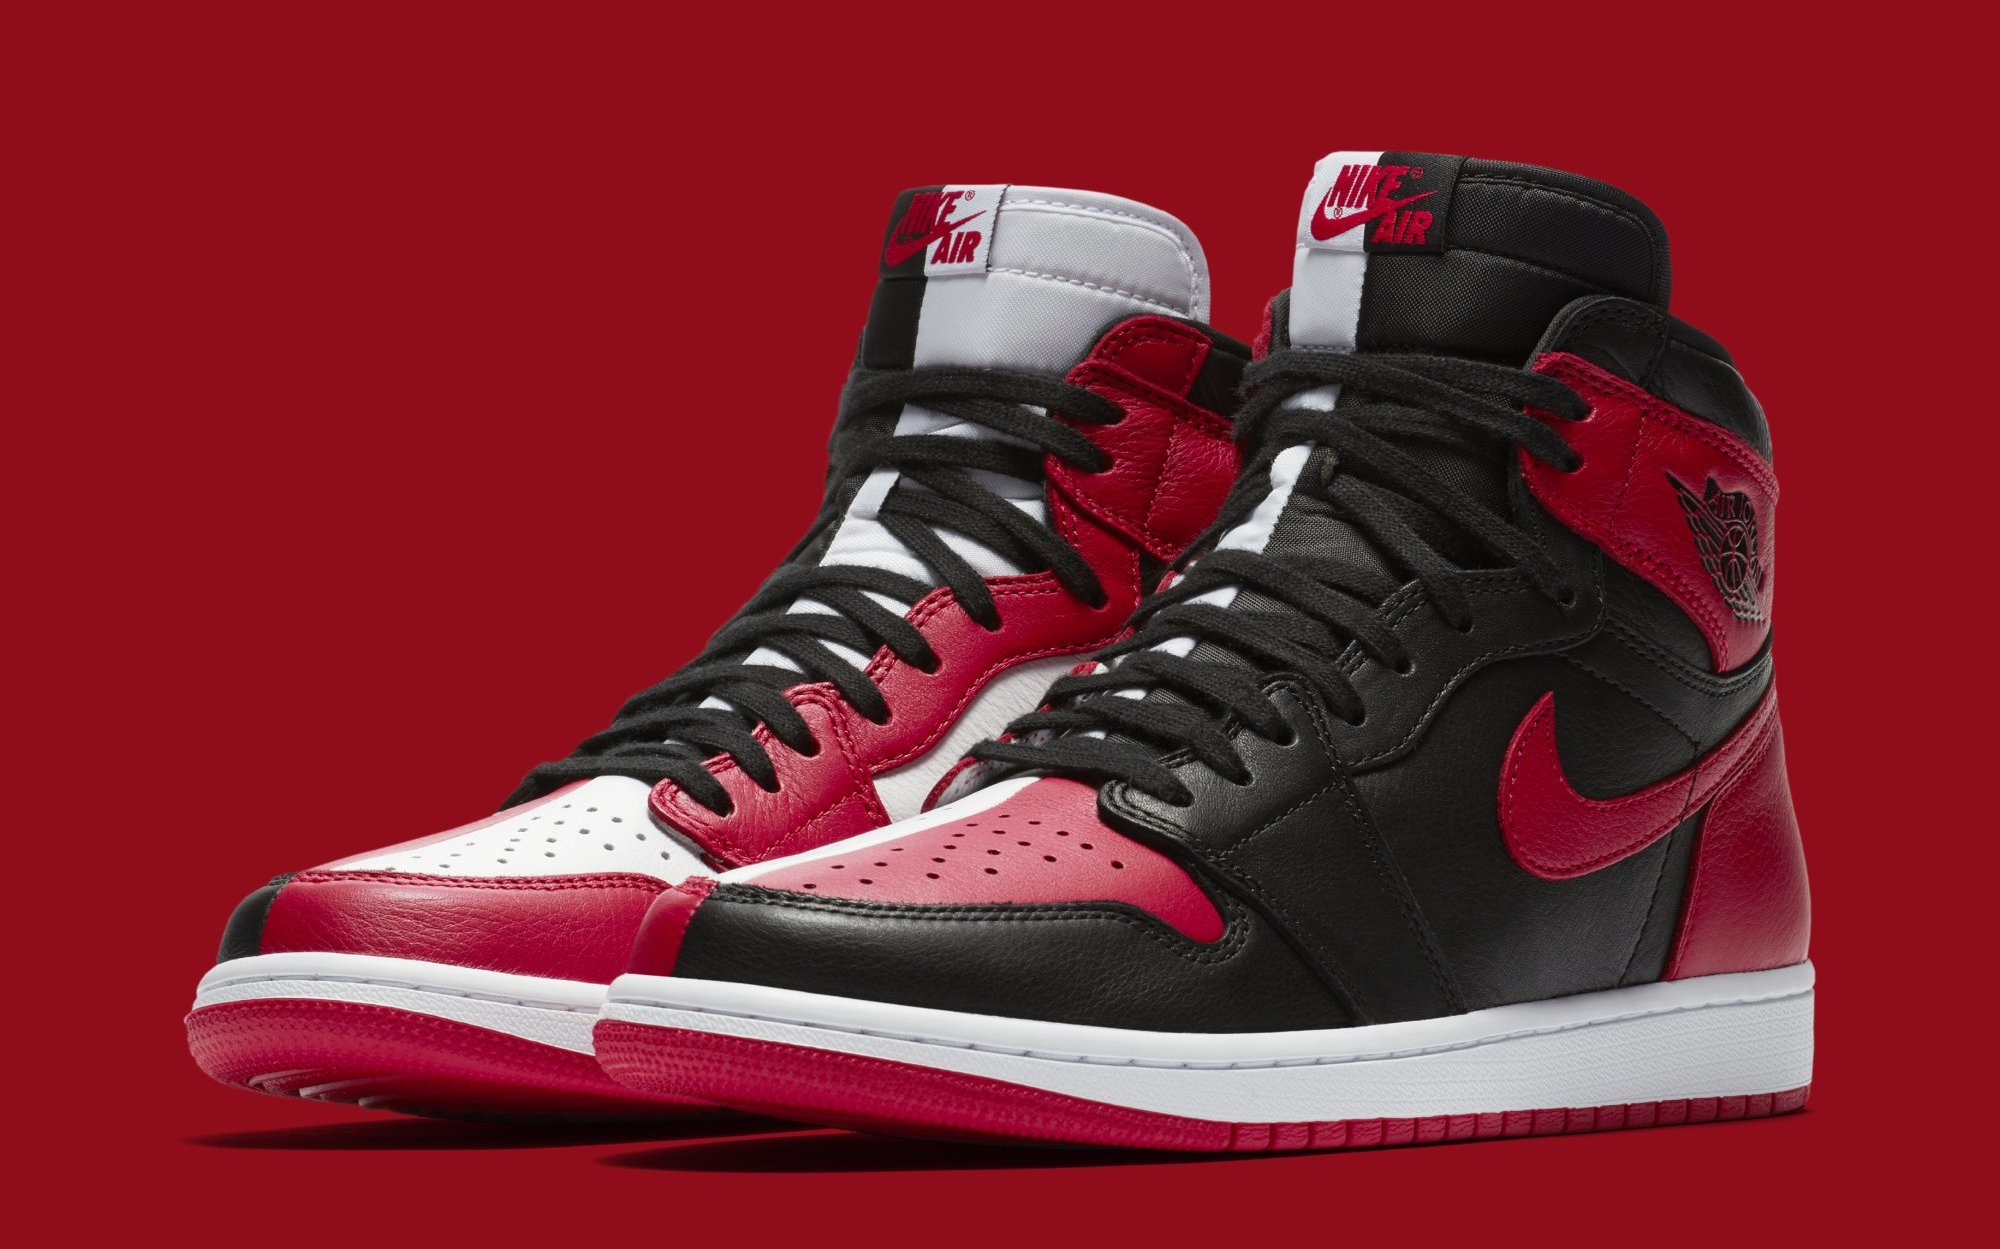 The New Chicago Jordan 1s Are For Poseurs